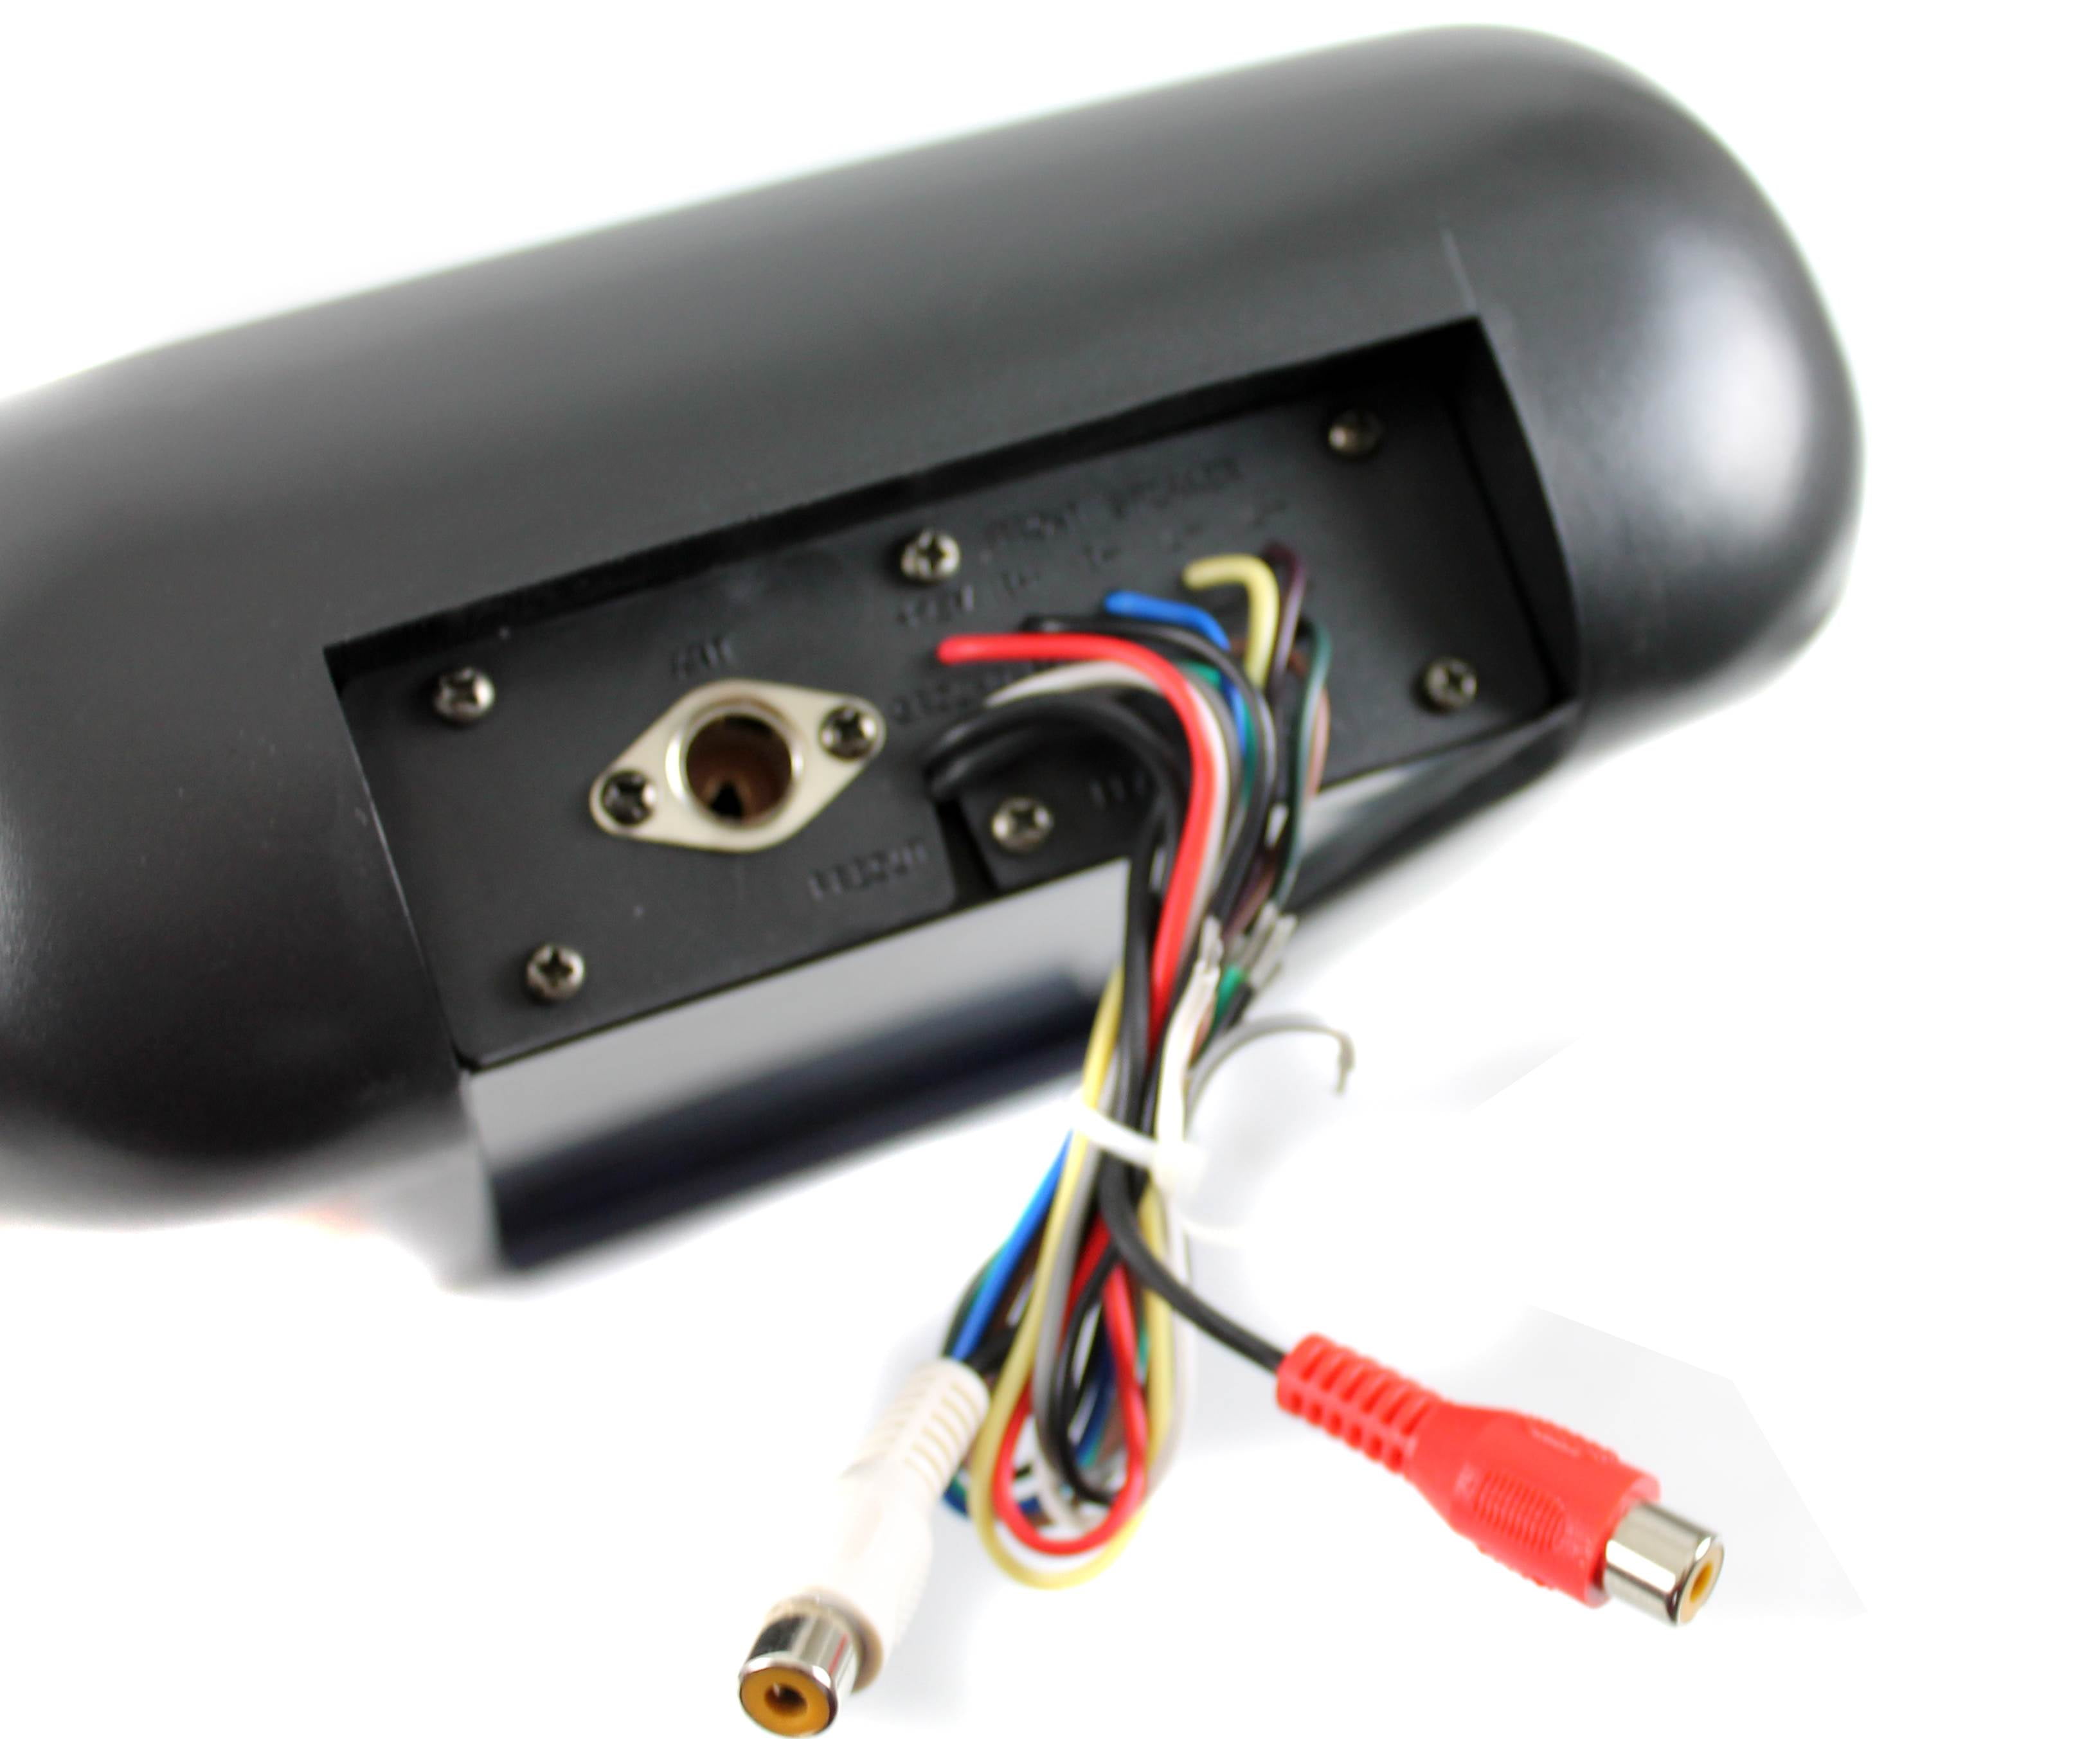 Pyle Waterproof Marine Stereo Housing to Mount on Boat or Outdoor